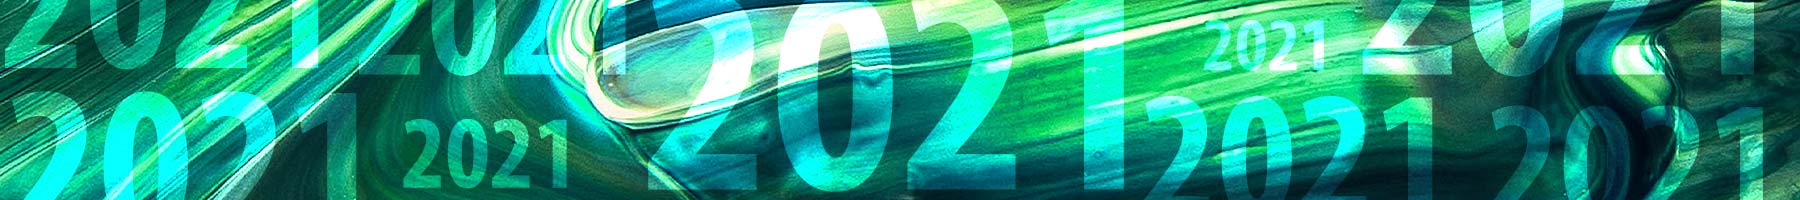 2021 numbers on a green background